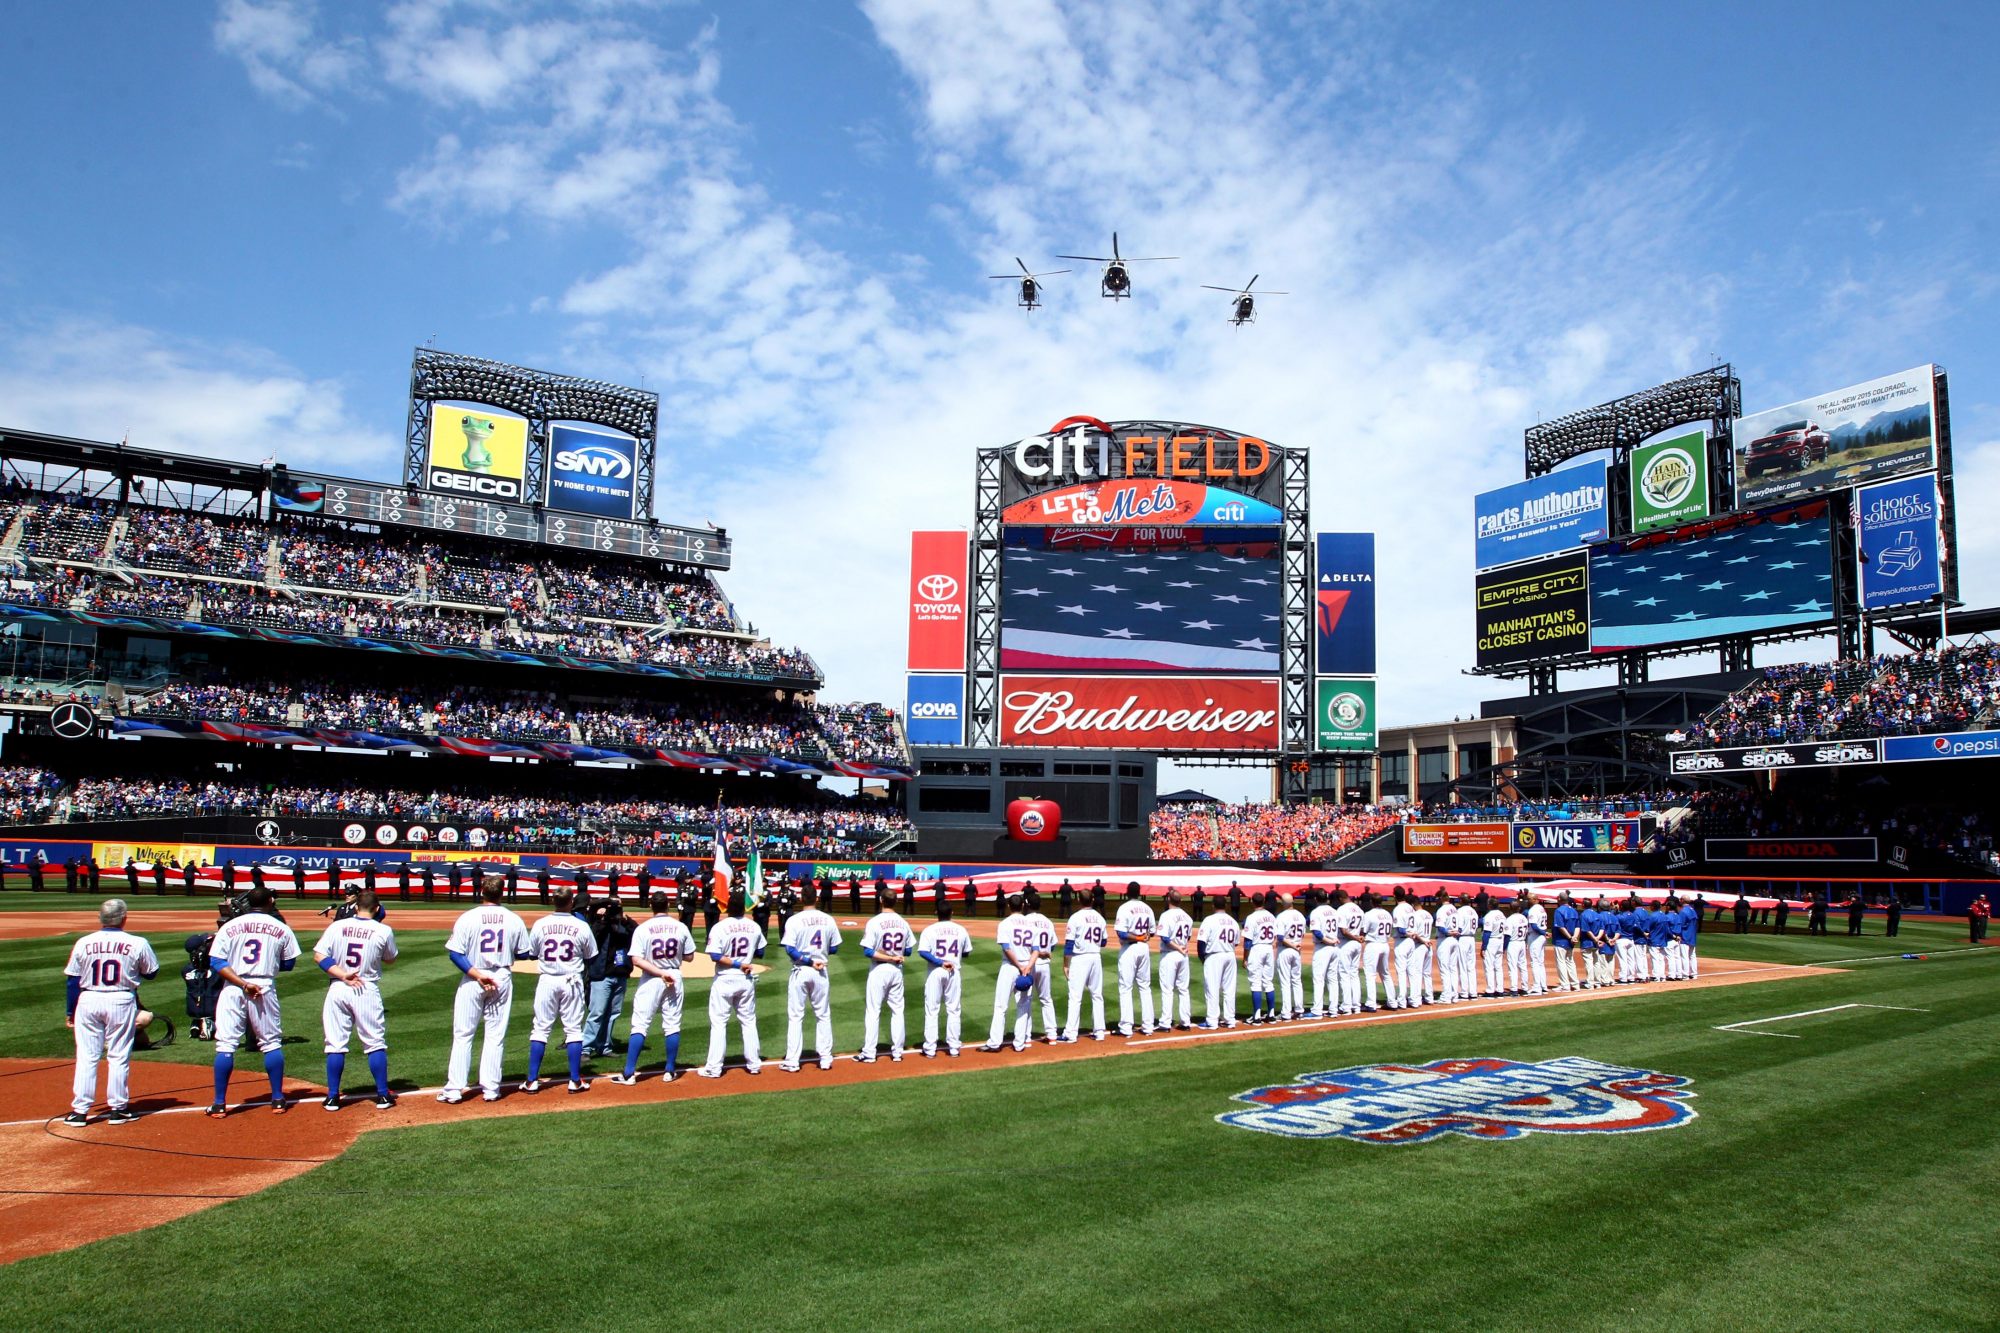 New York Mets Opening Day Statistics That May Surprise Fans